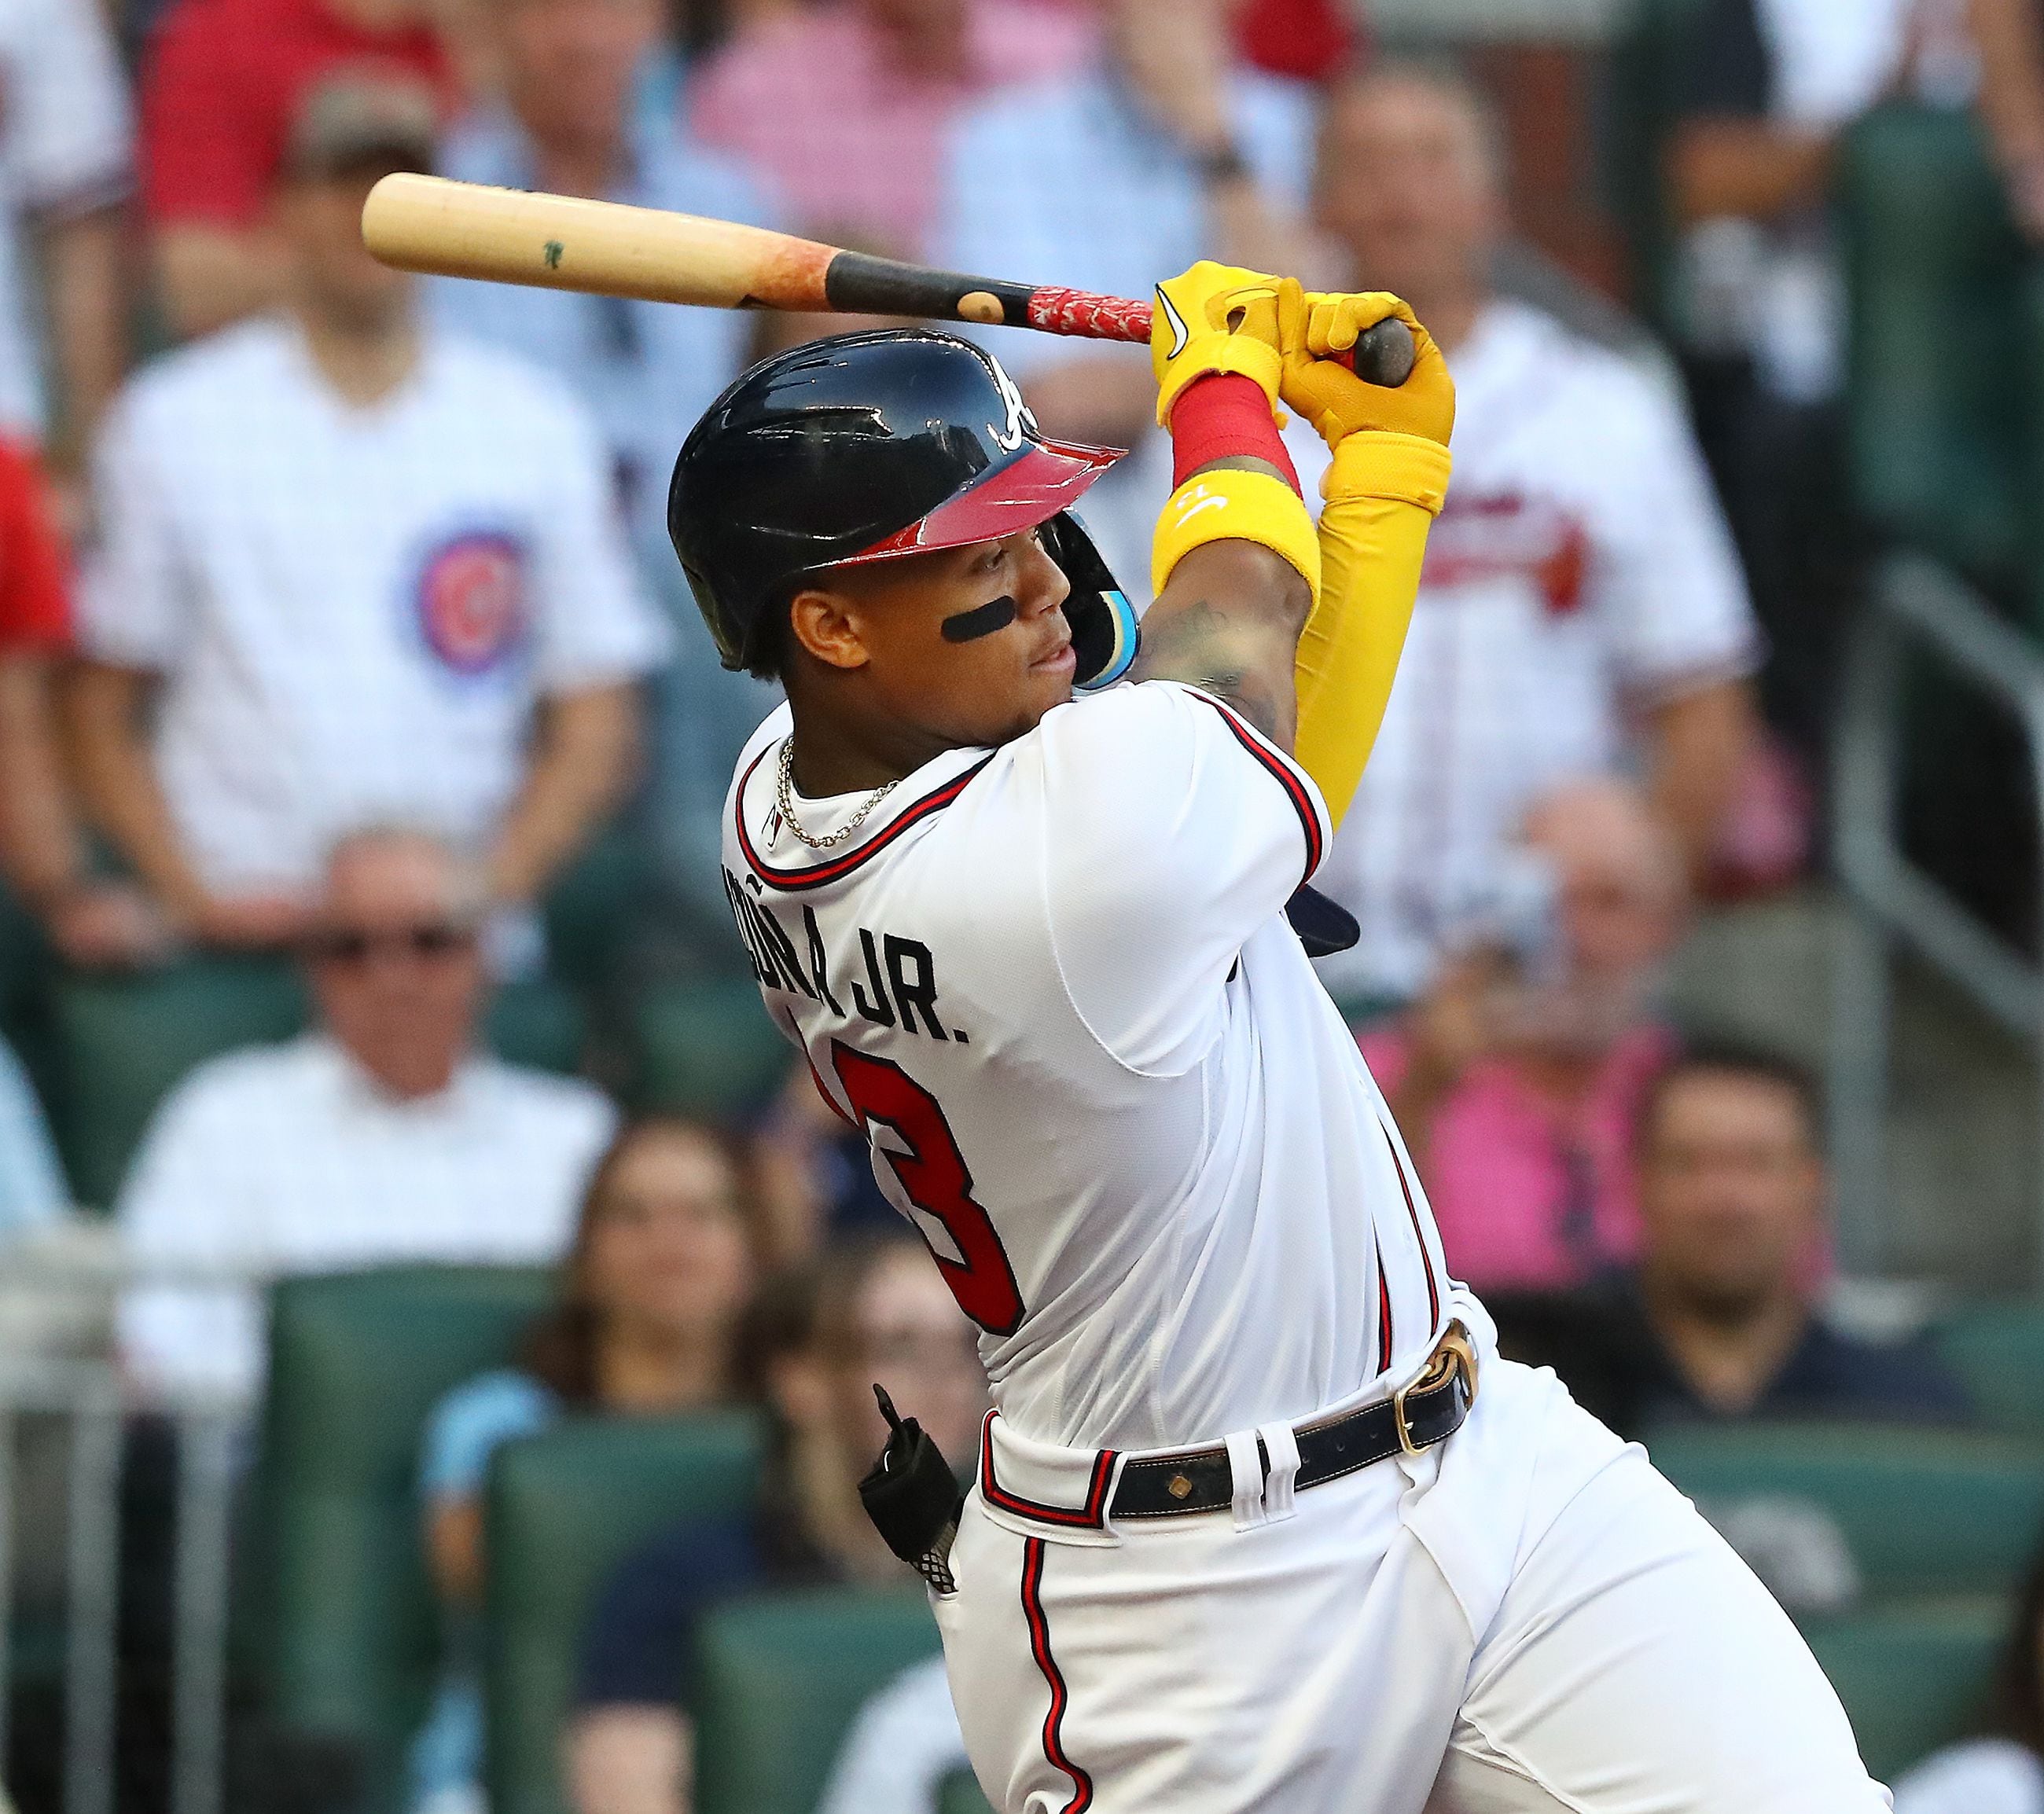 This Day in Braves History: Ronald Acuña Jr. joins 30-30 club